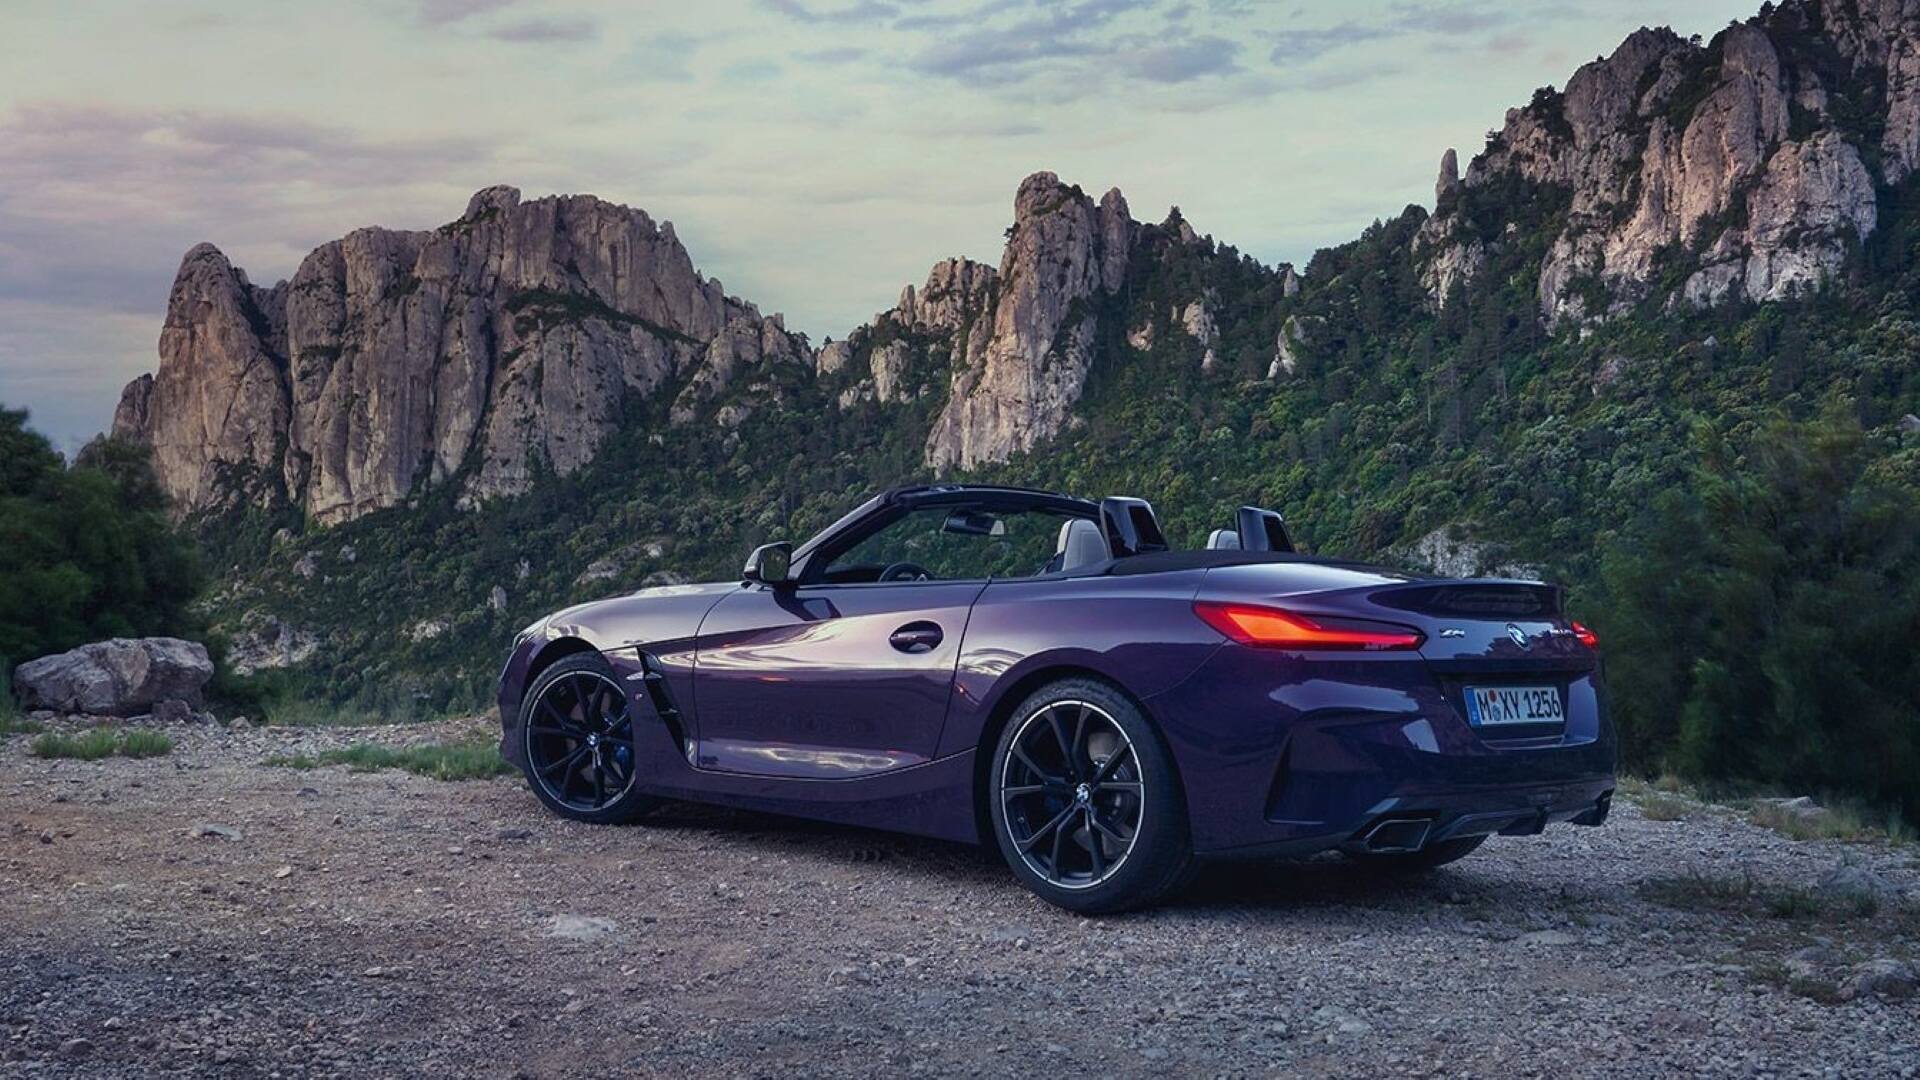 BMW Z4 To Bow Out After The Current Generation, Reports Say